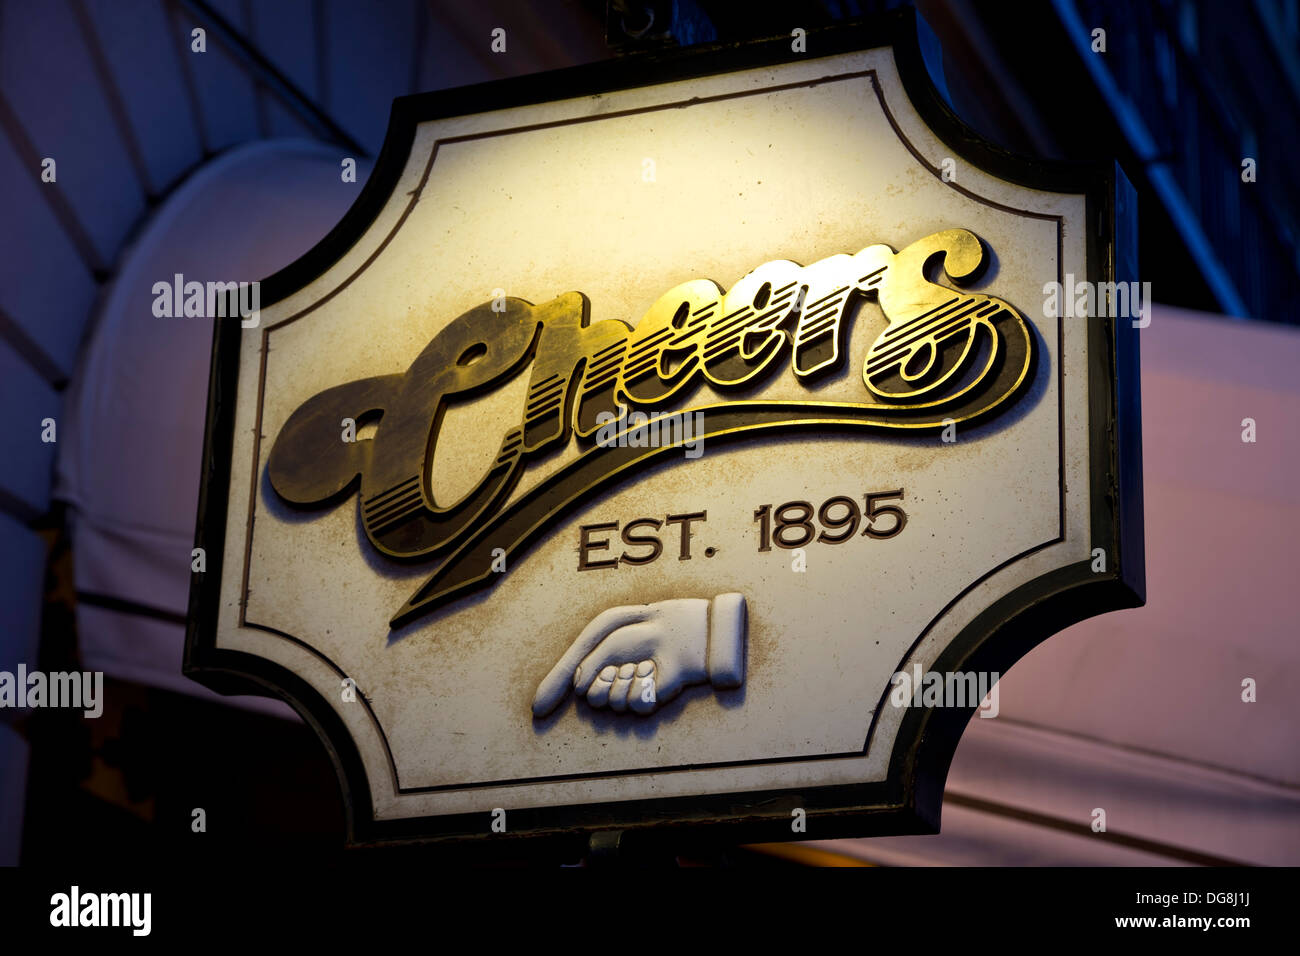 'Cheers' bar signe, Boston, Massachusetts, USA Banque D'Images